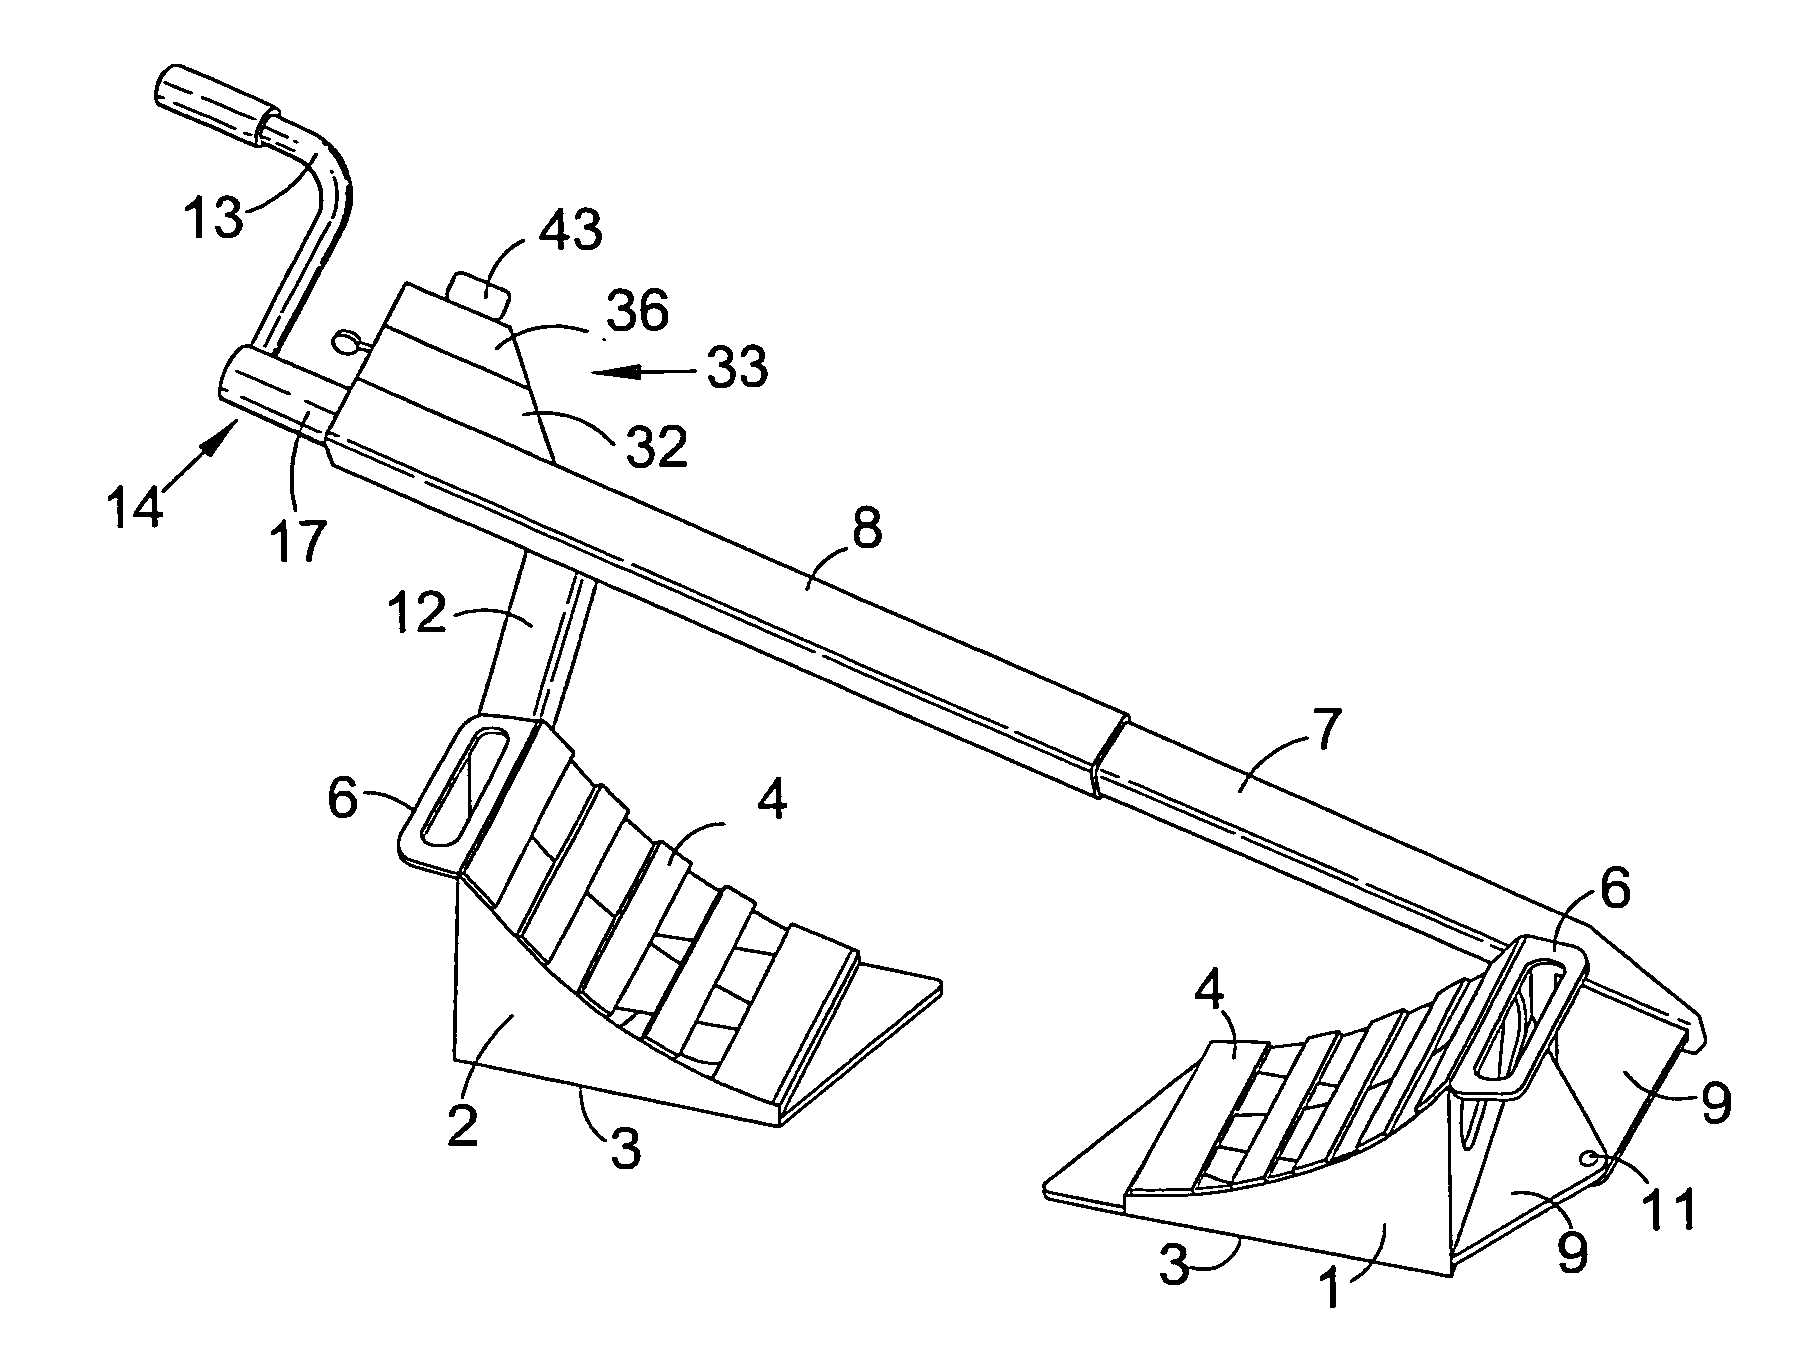 Device for immobilizing a vehicle